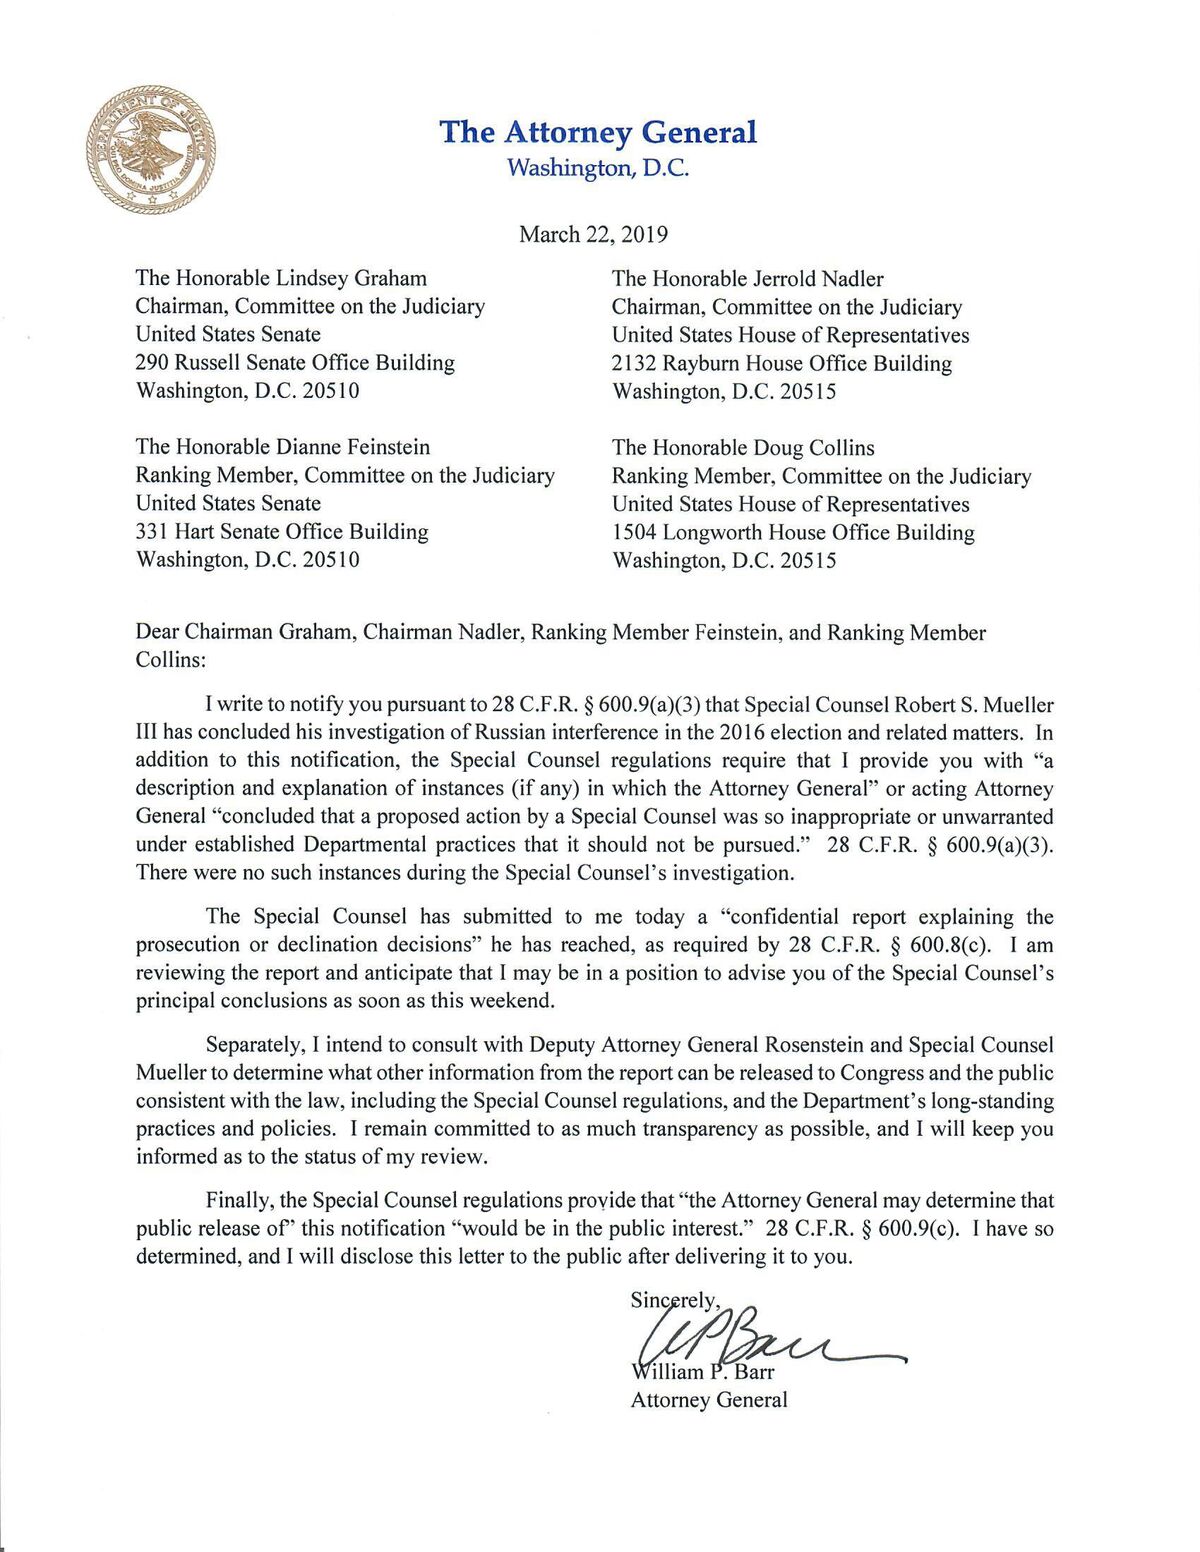 read-barr-s-letter-to-congress-on-the-end-of-the-mueller-inquiry